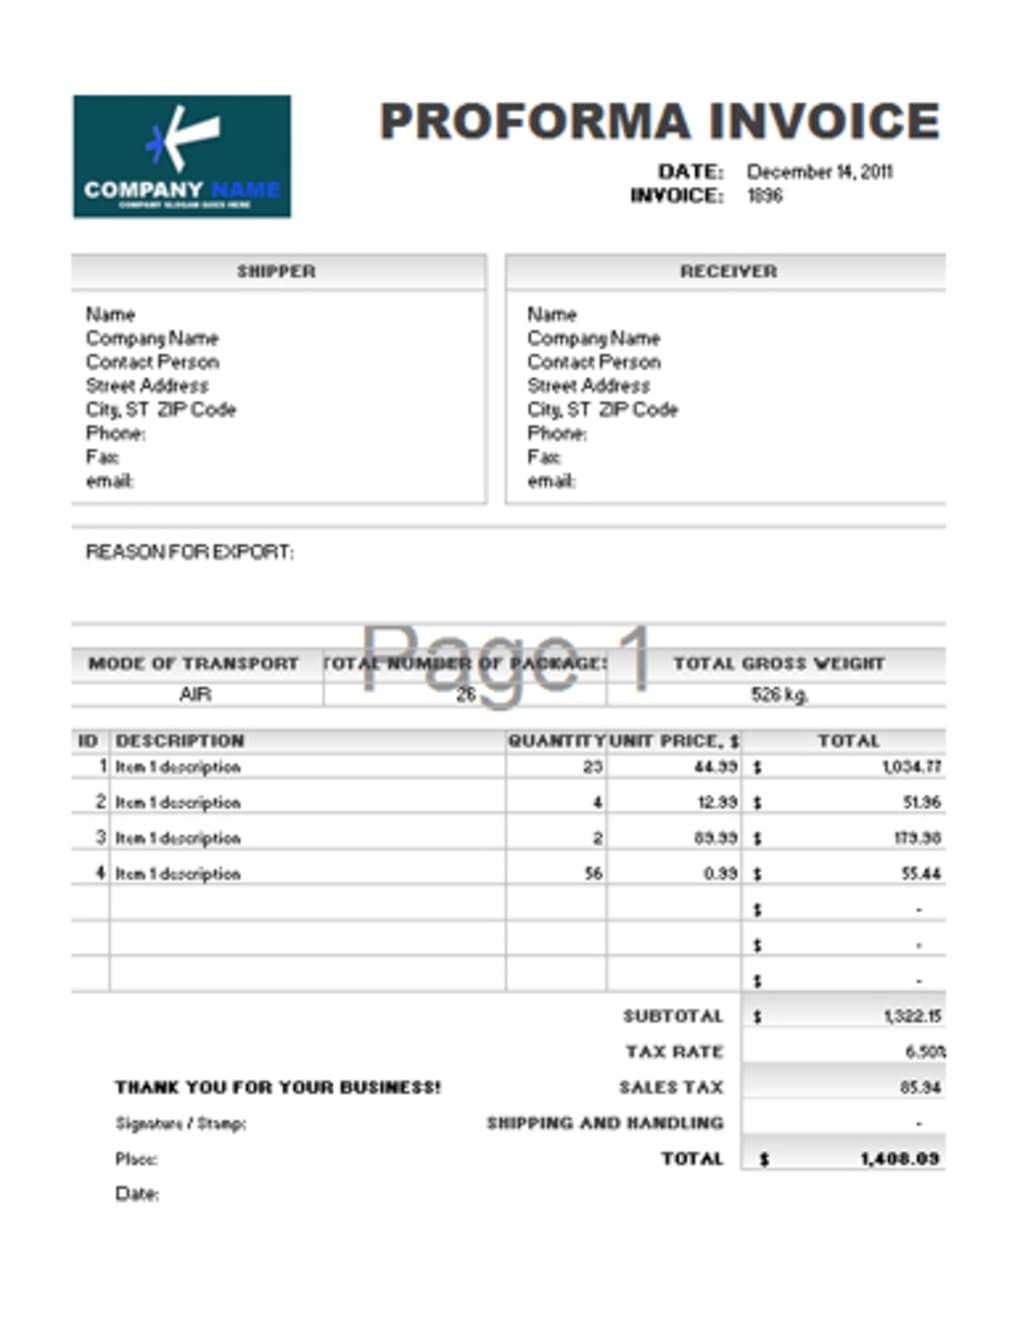 Proforma invoice template - Download Intended For Proforma Invoice Template India